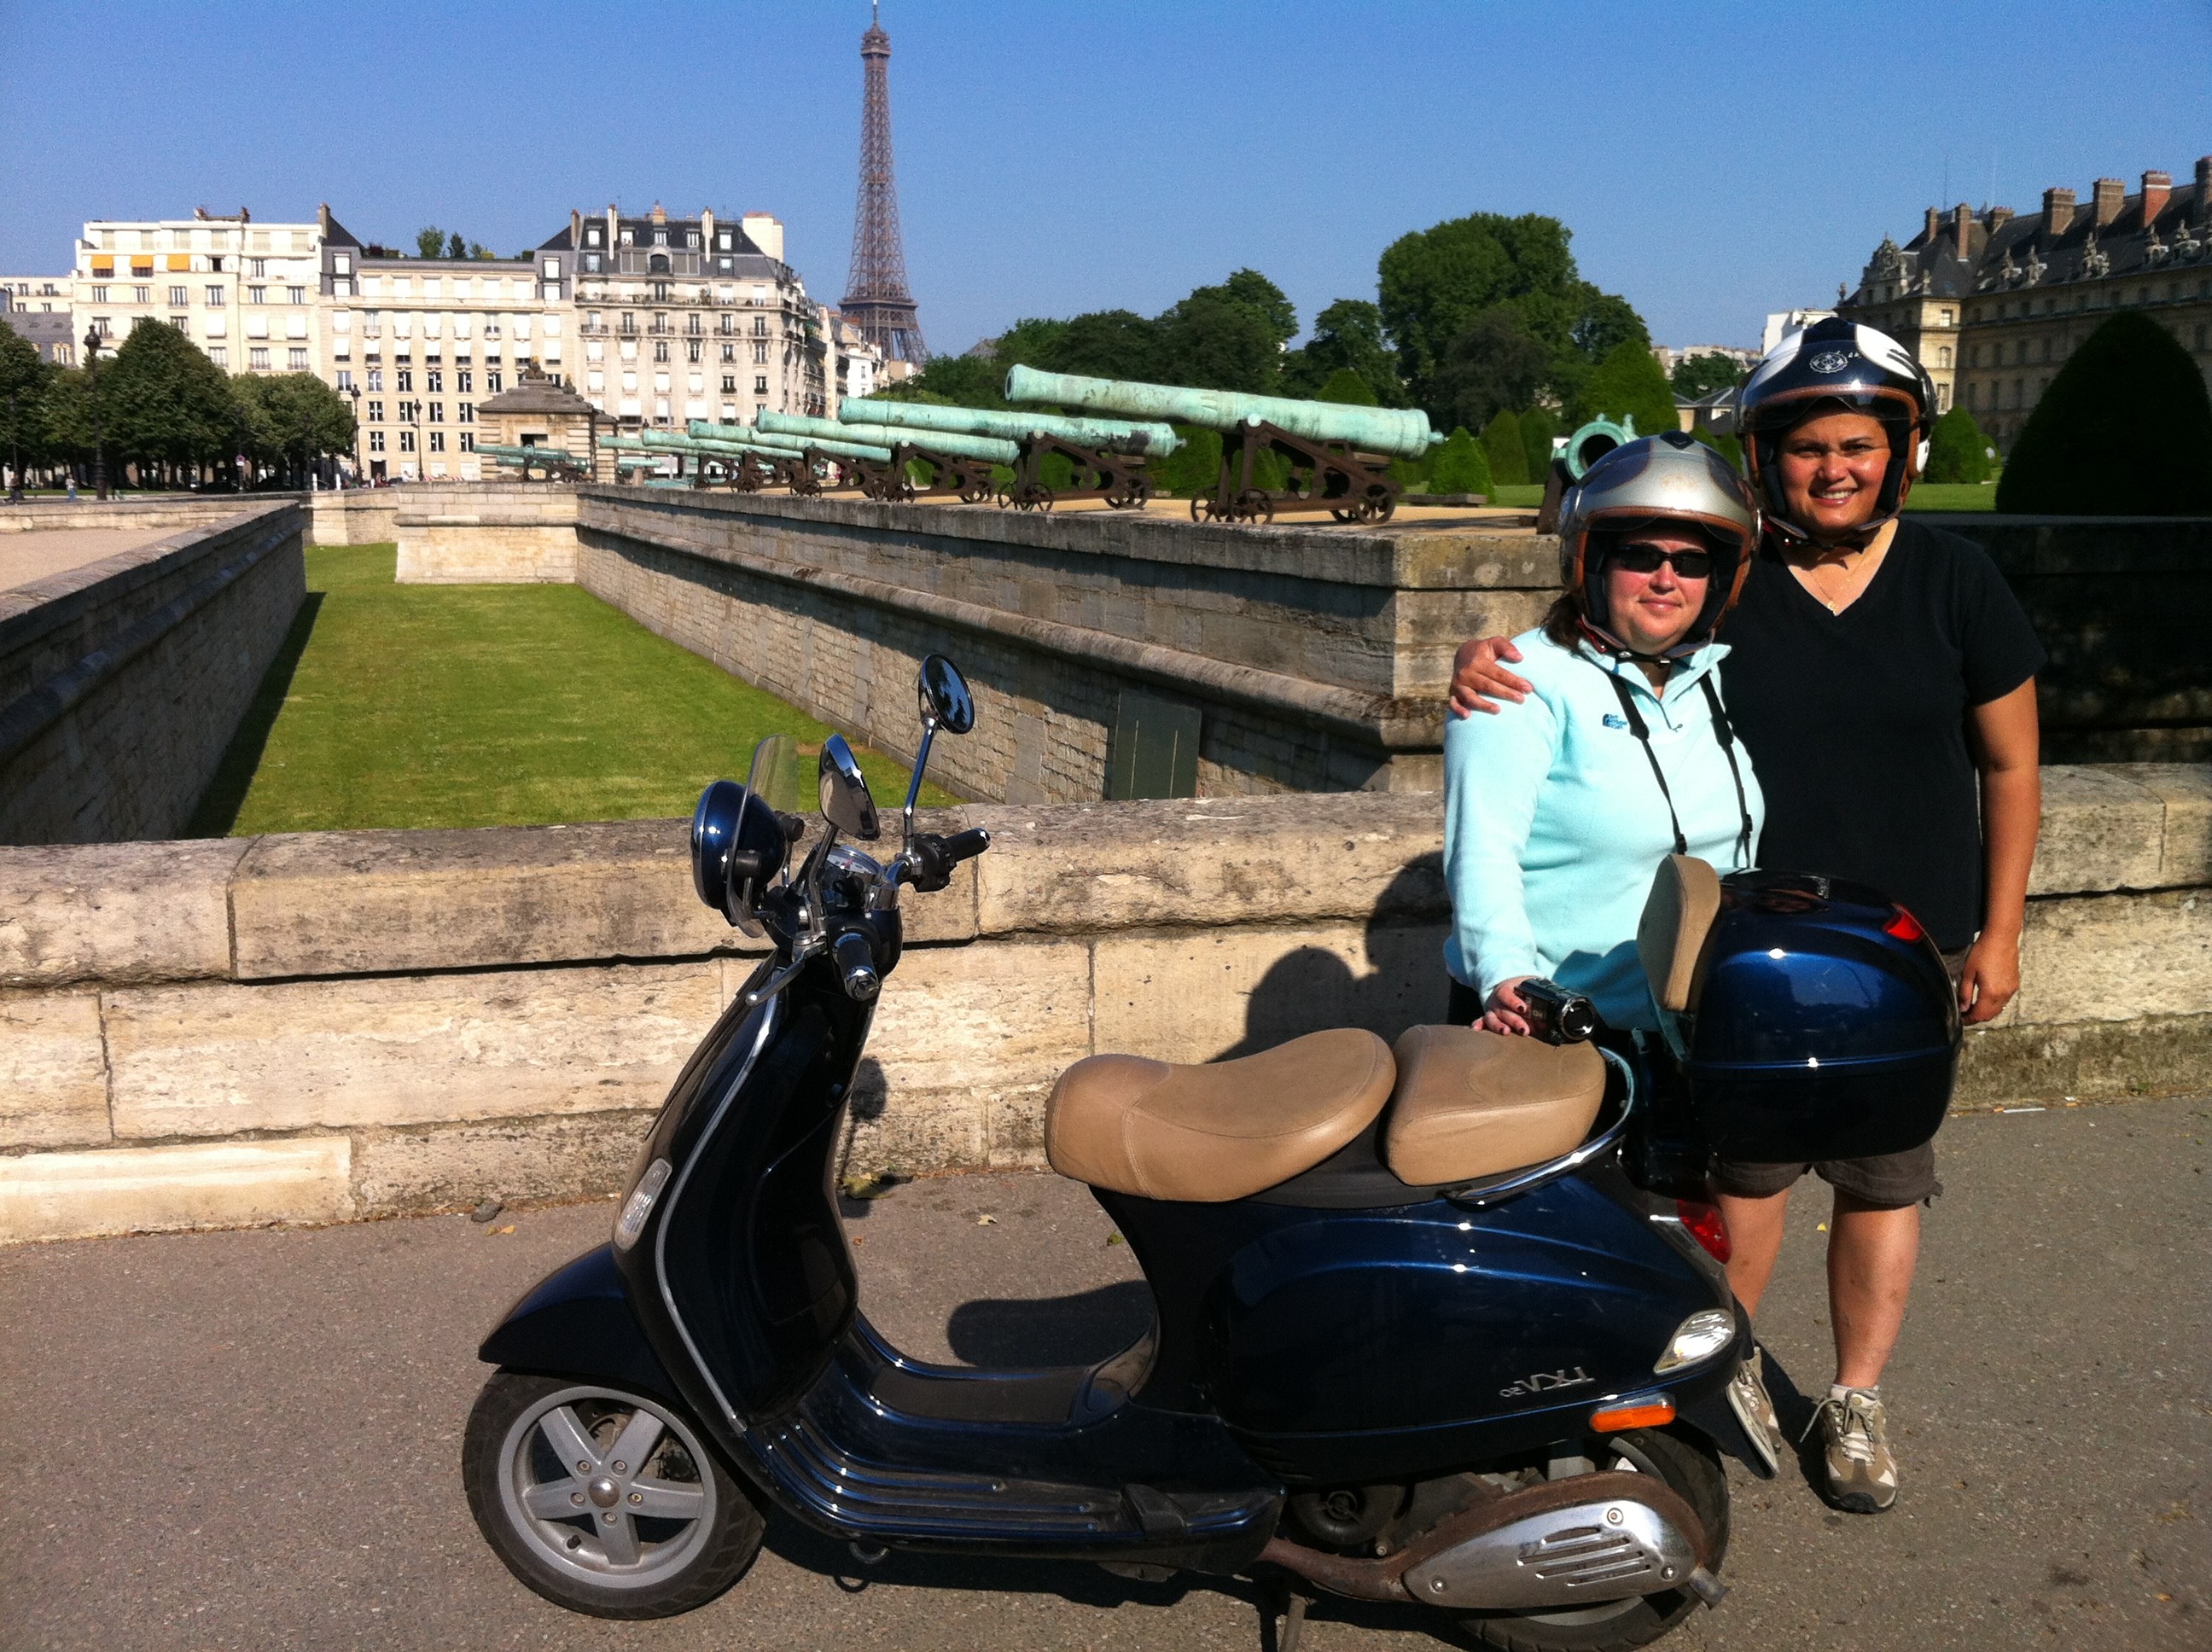 Invalides and the Eiffel tower by Vespa scooter - pictures of Paris France